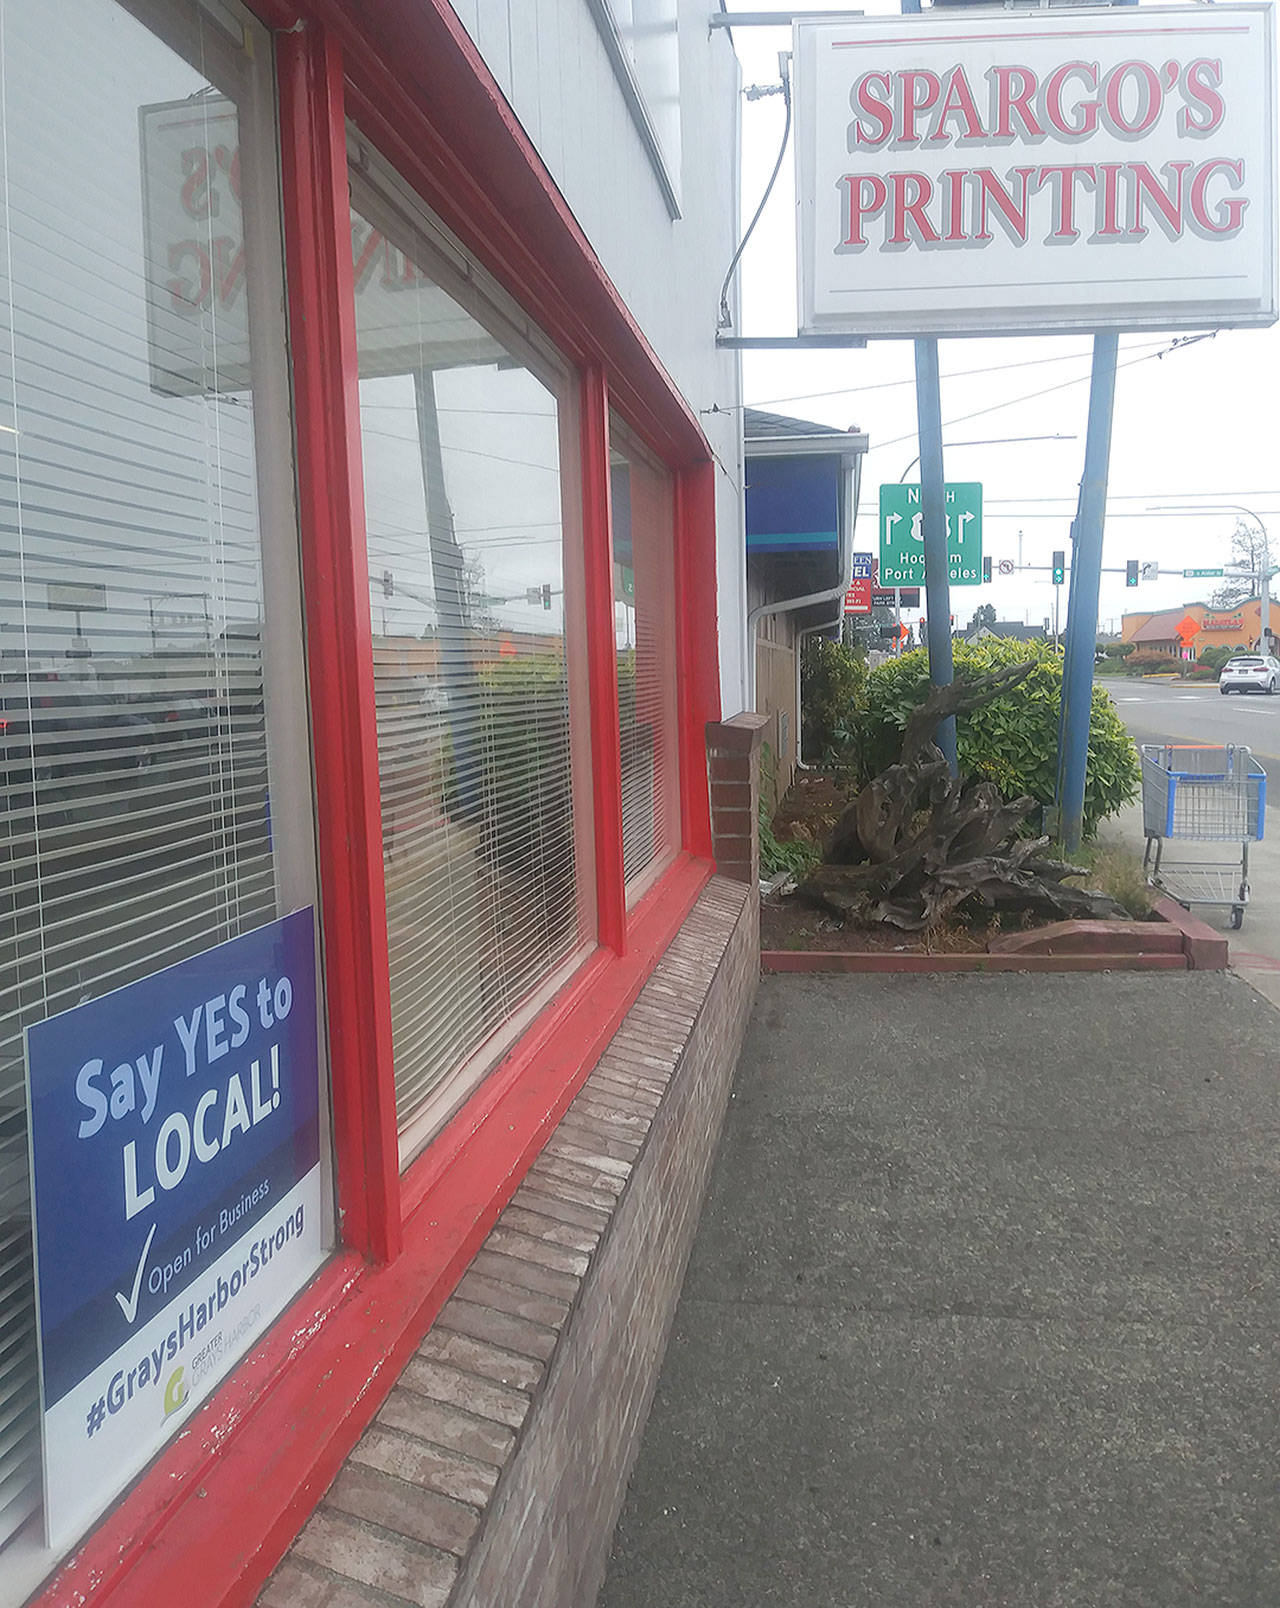 A “Say YES to LOCAL” sign appears outside the storefront of Spargo’s Printing in Aberdeen, where they were created. (David Haerle/The Daily World)